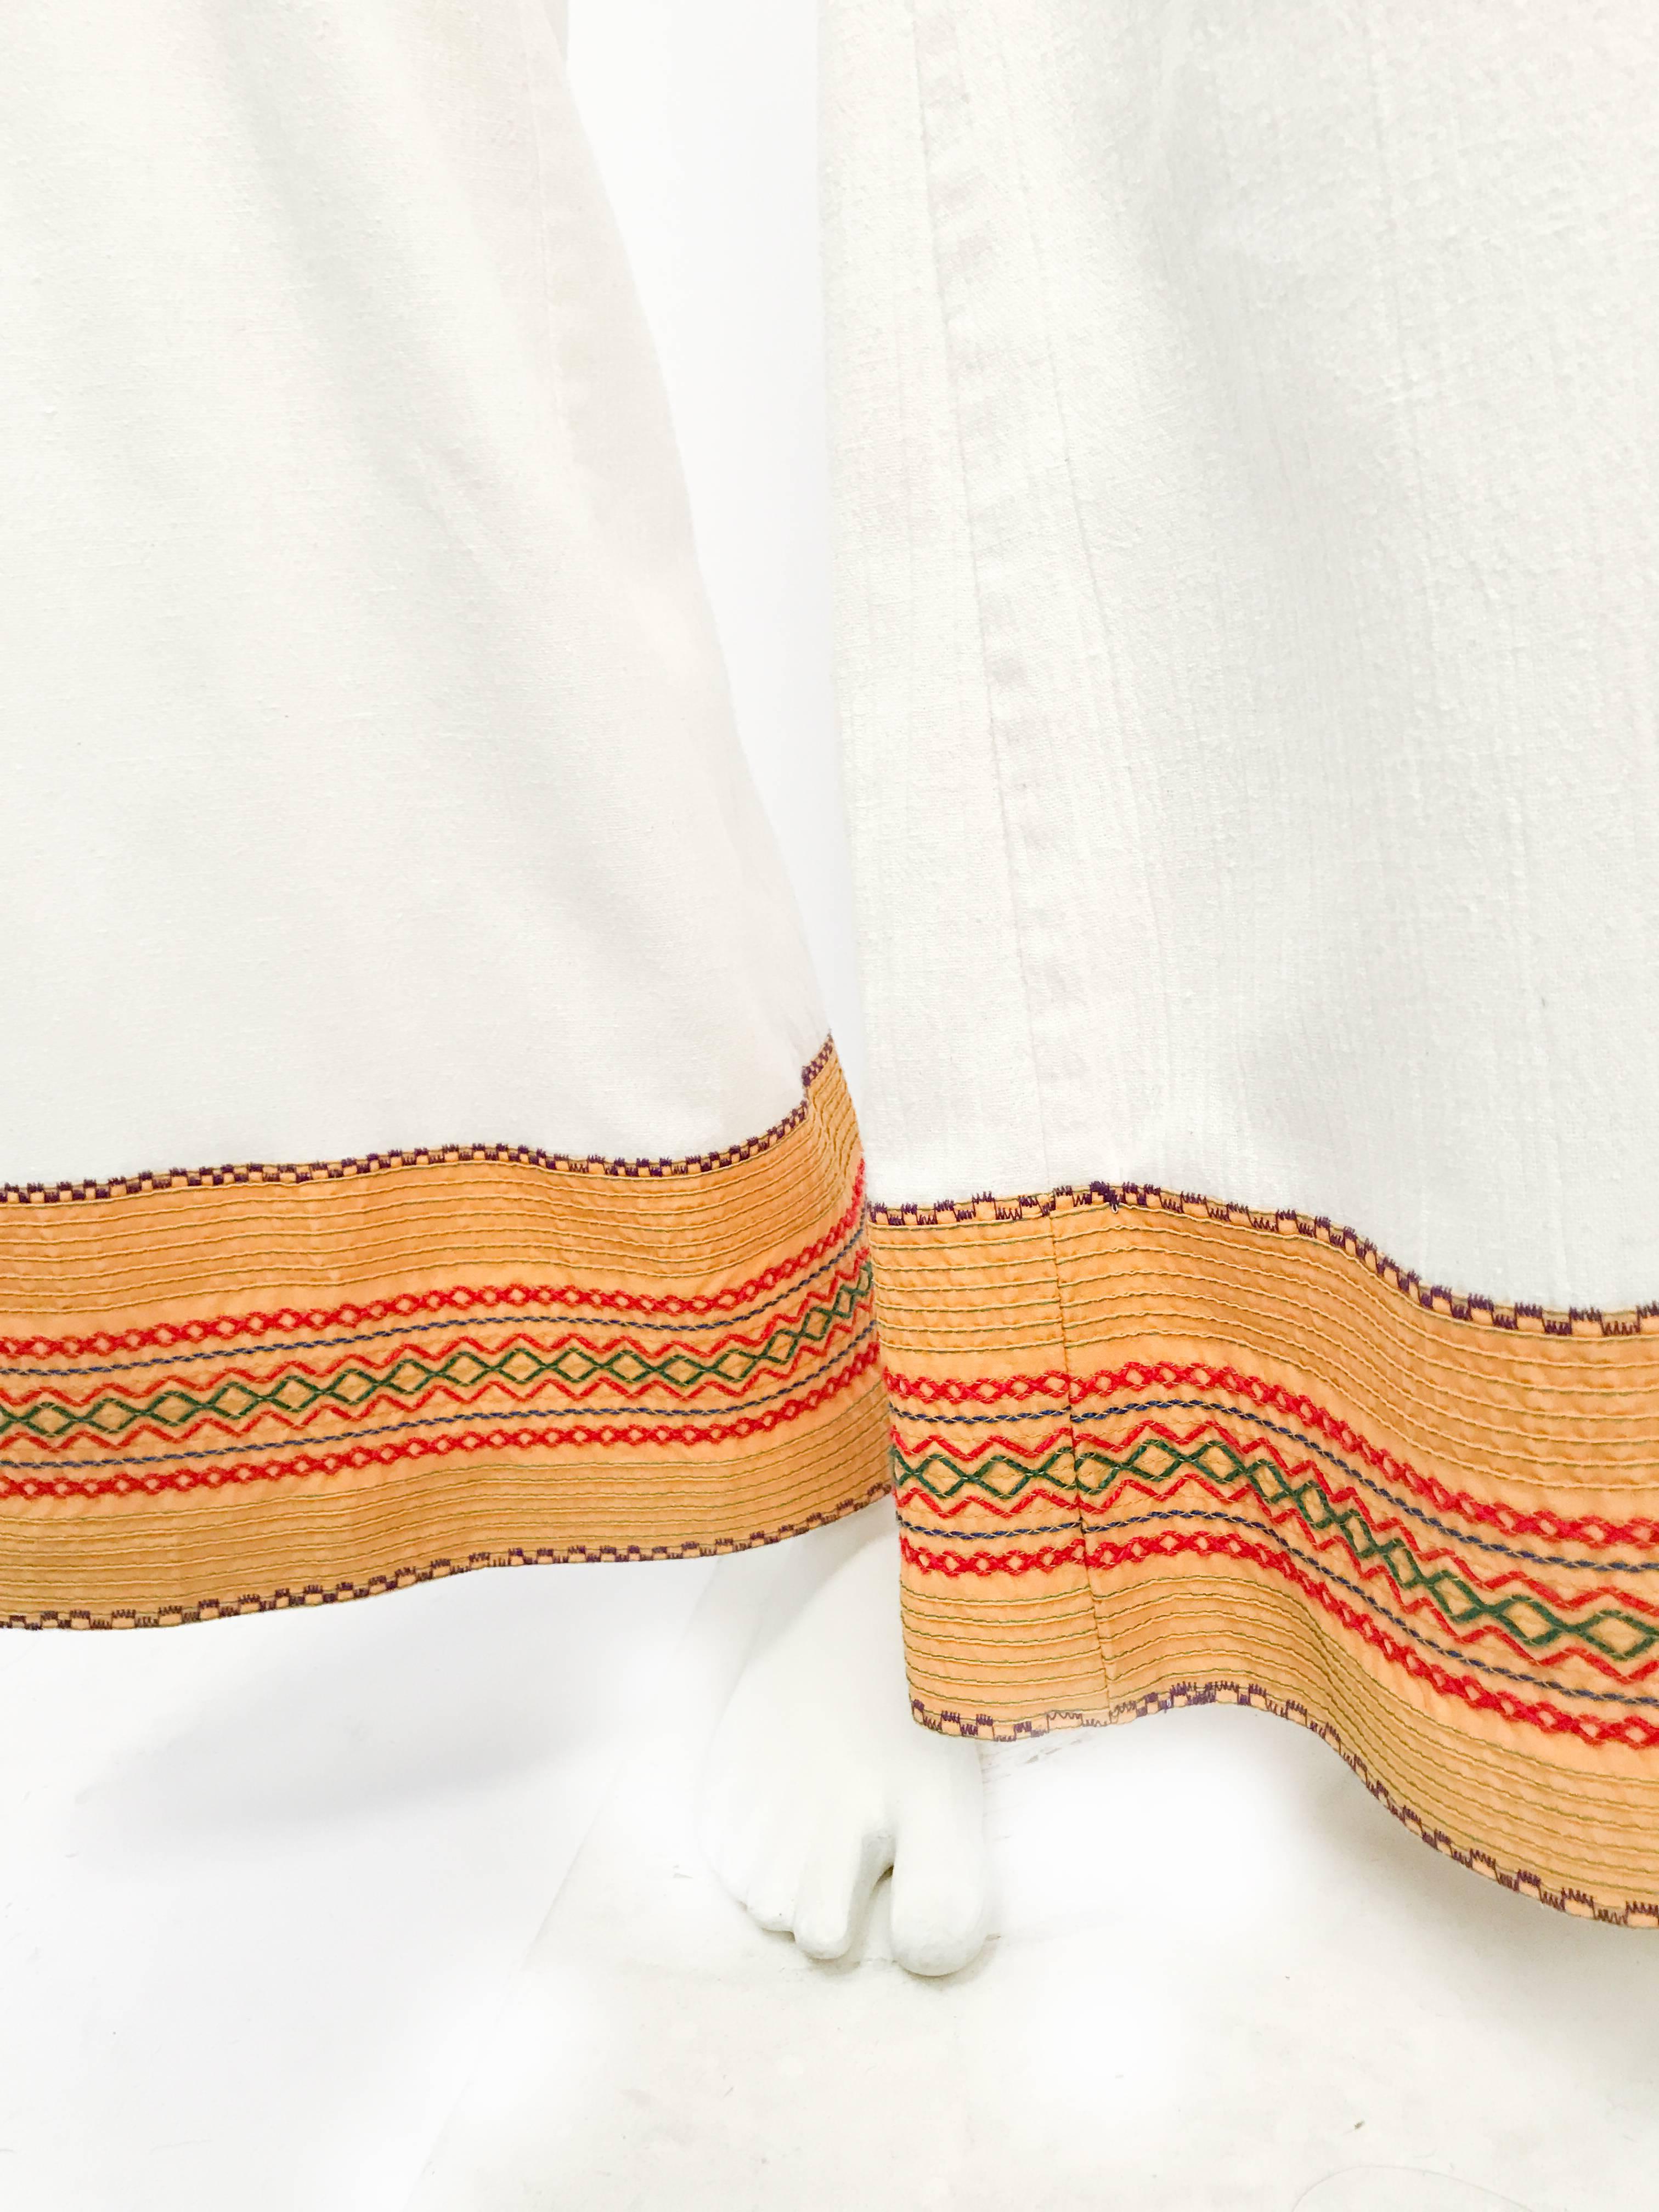 1970s White Wide Legged Pants with Embellished Hems. White wide-legged pants with yellow/red/green embroidered hems and zipper/button closure.